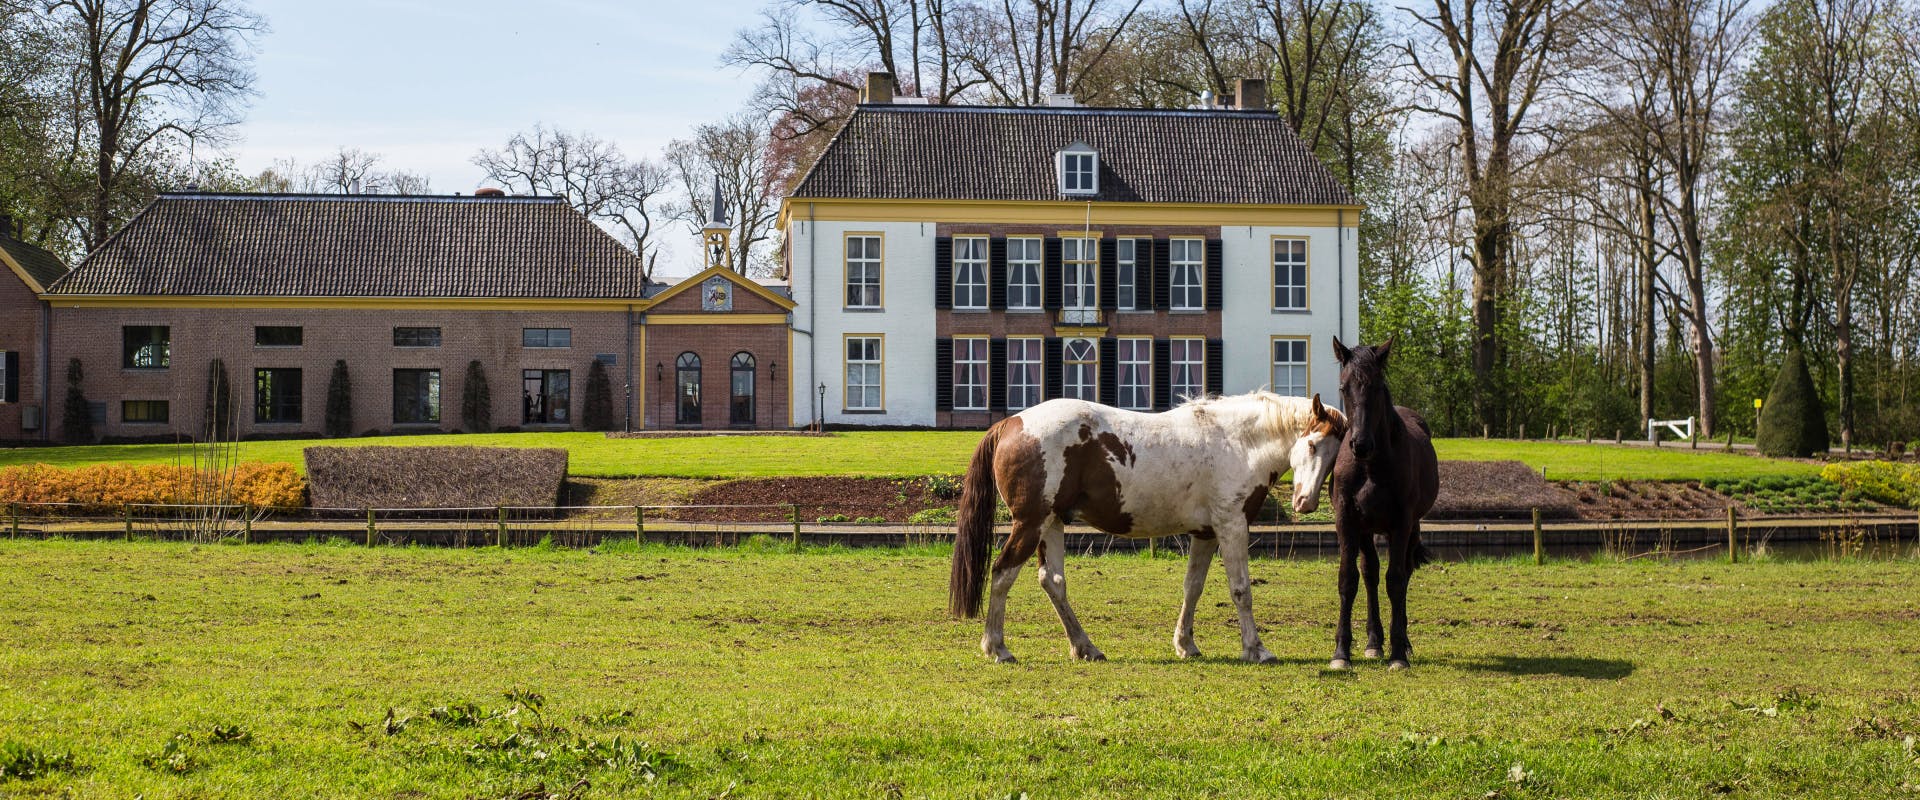 Two horses in the grounds of a historic property.